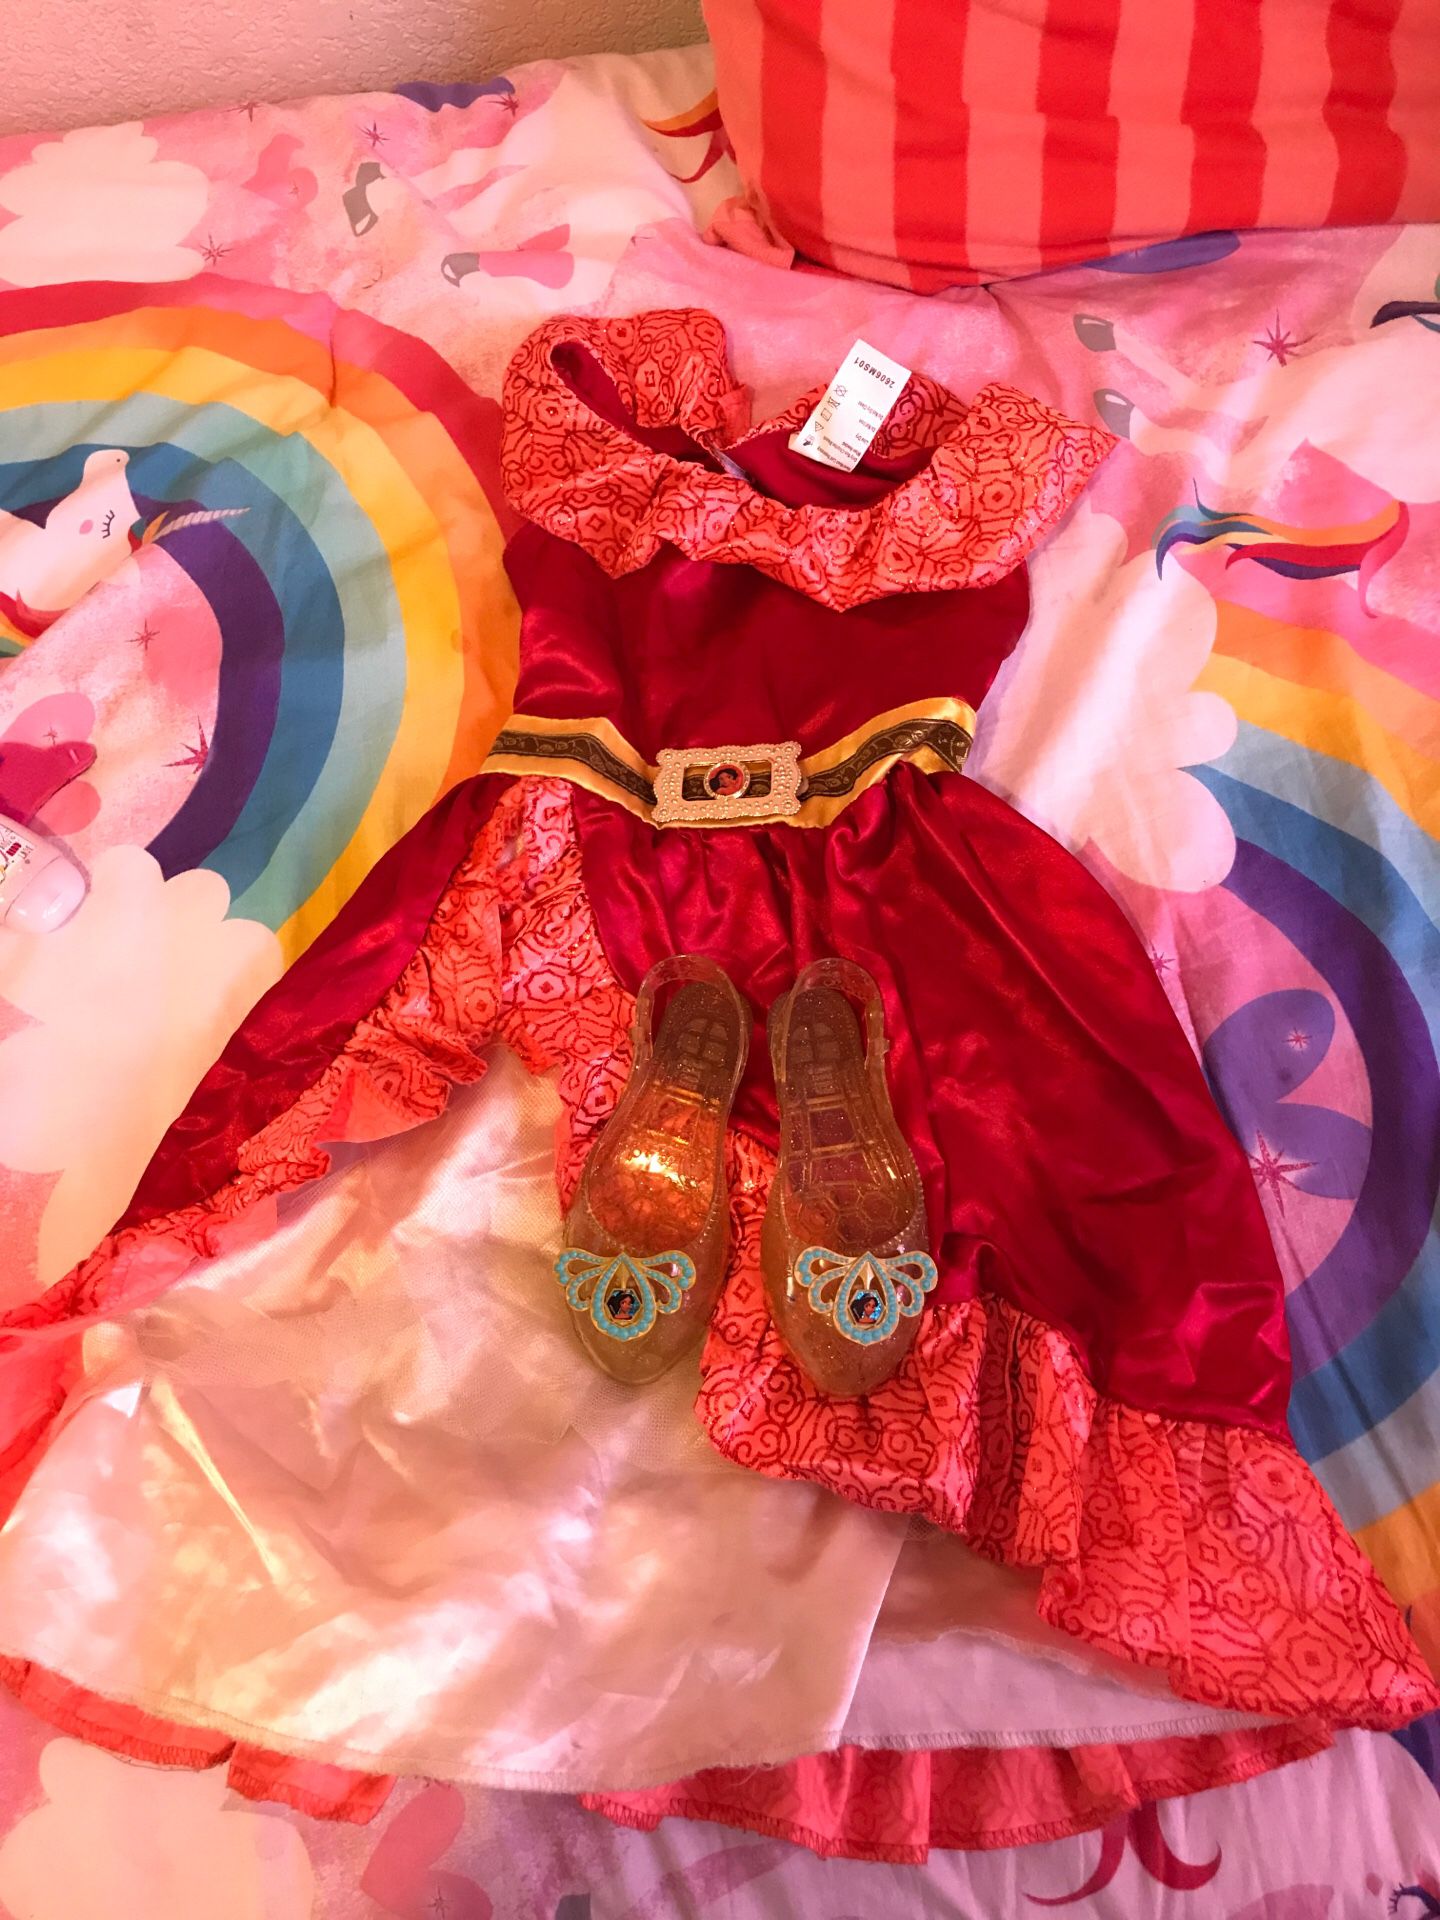 Elena of Avalor Costume and shoes